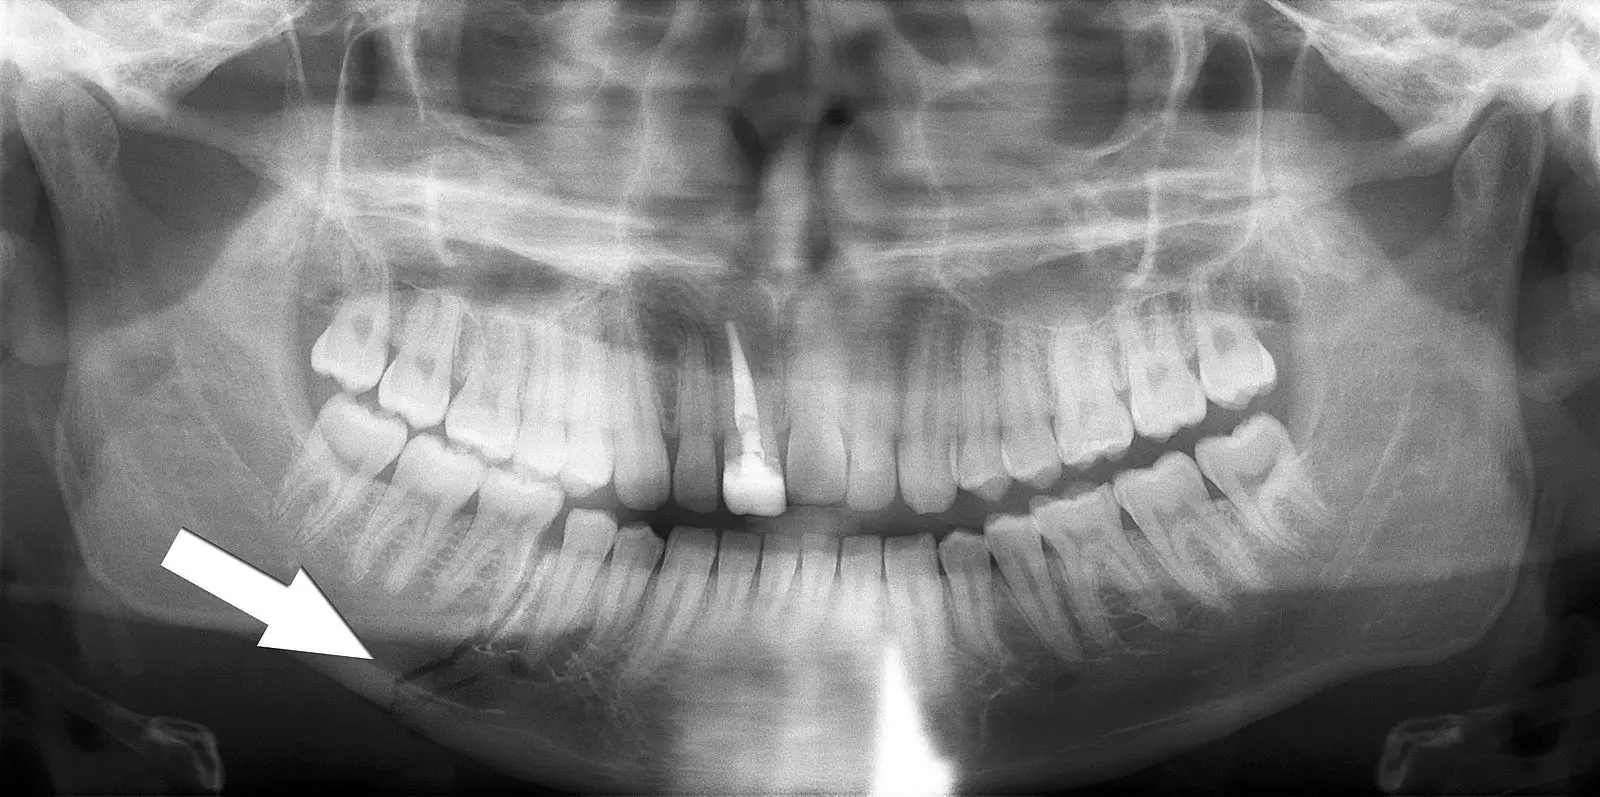 Simple Mandible Fracture X-ray SimpleMed